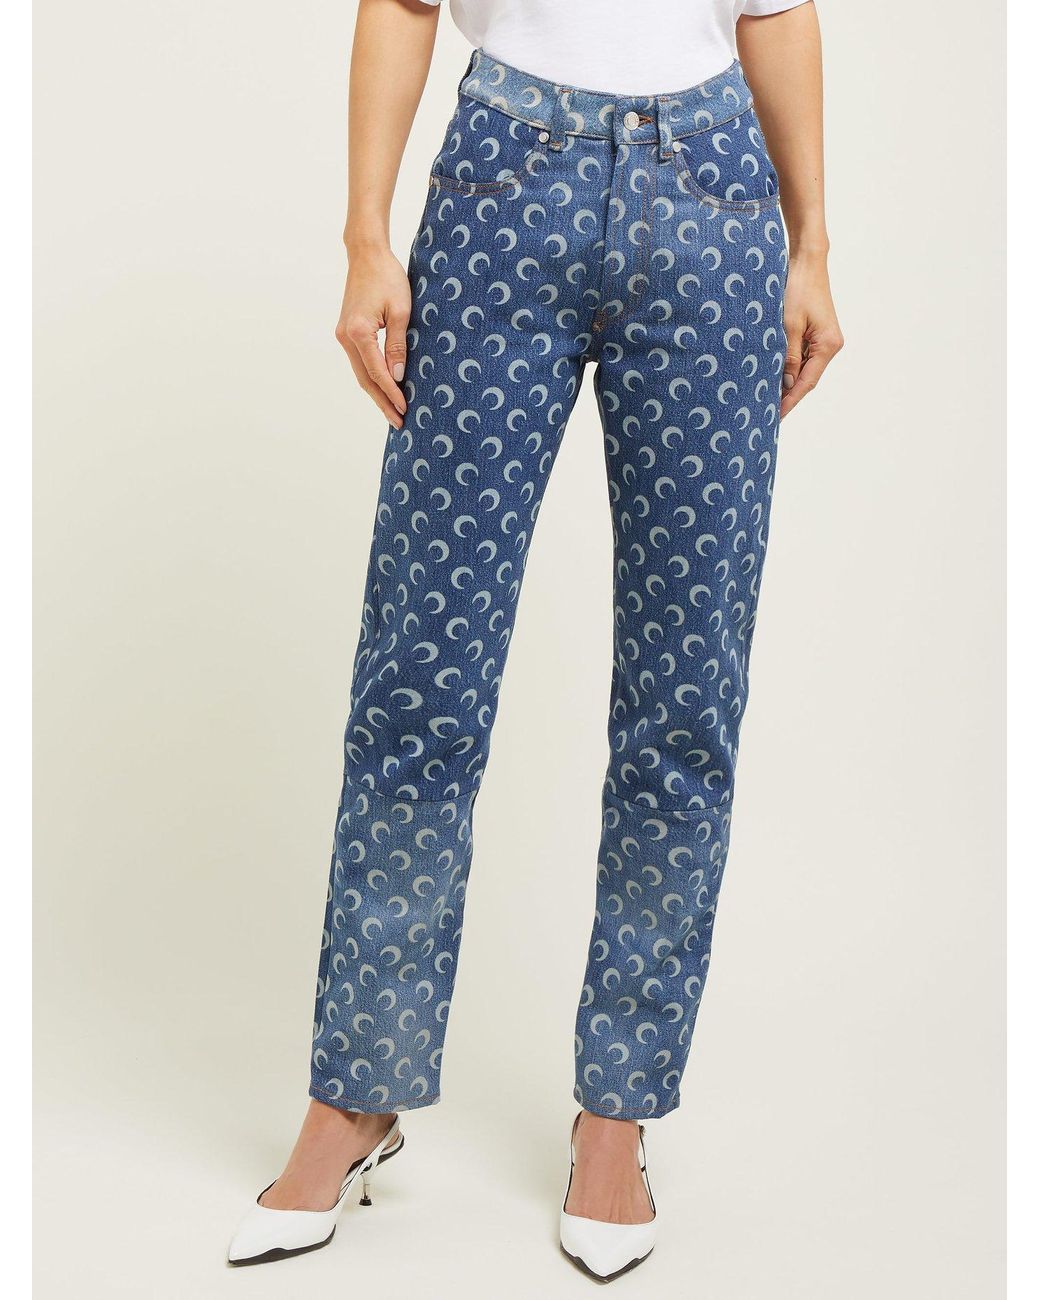 Marine Serre Crescent Moon Patterned Jeans in Blue | Lyst Canada